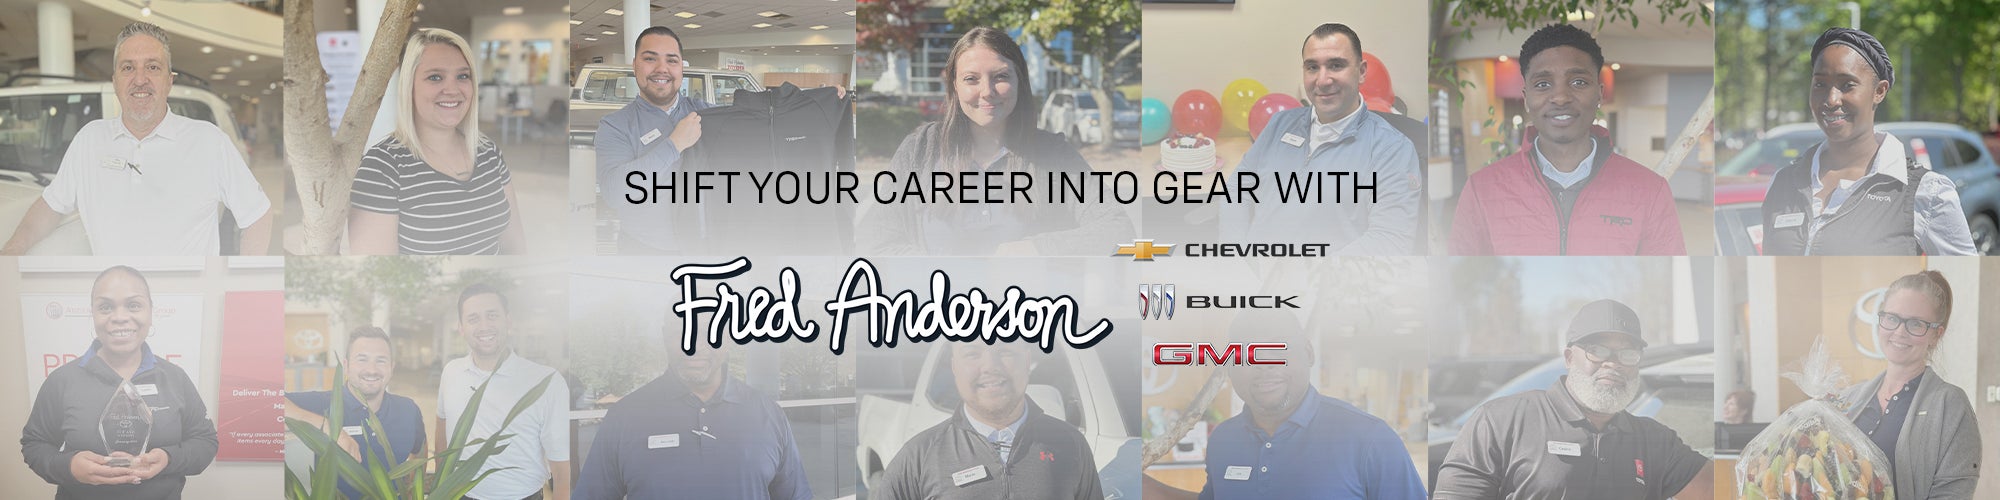 Fred Anderson Chevrolet Buick GMC in Greer SC